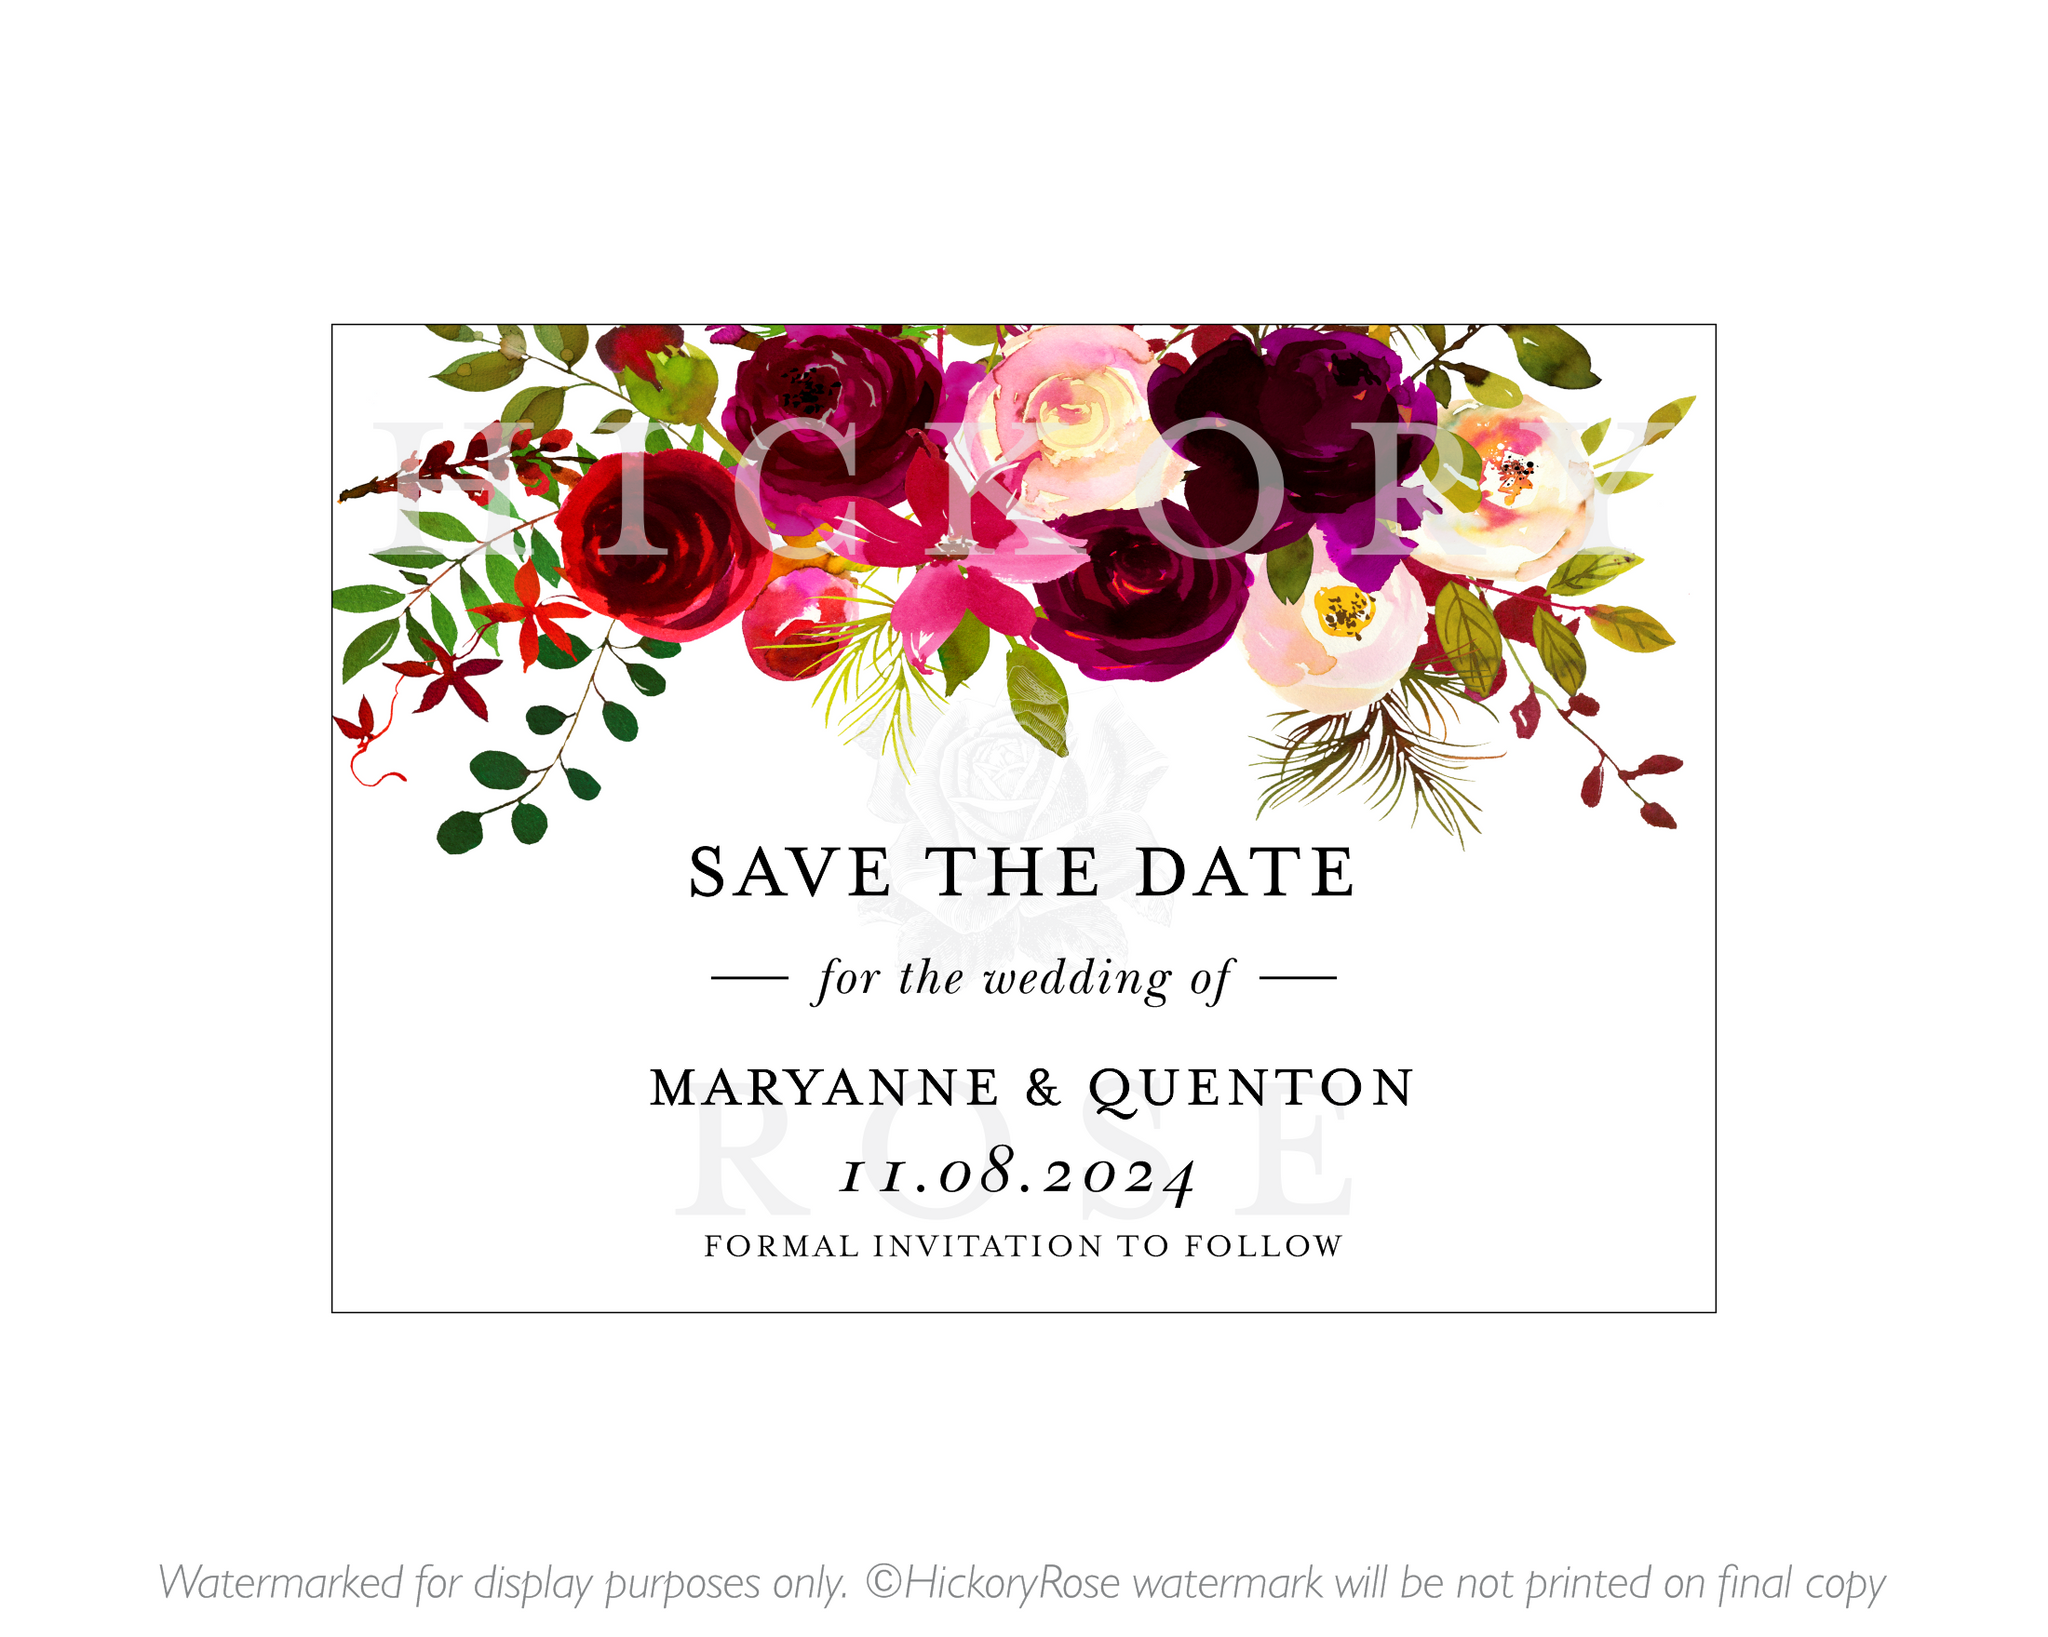 Queen's Garden | Save the Date Cards